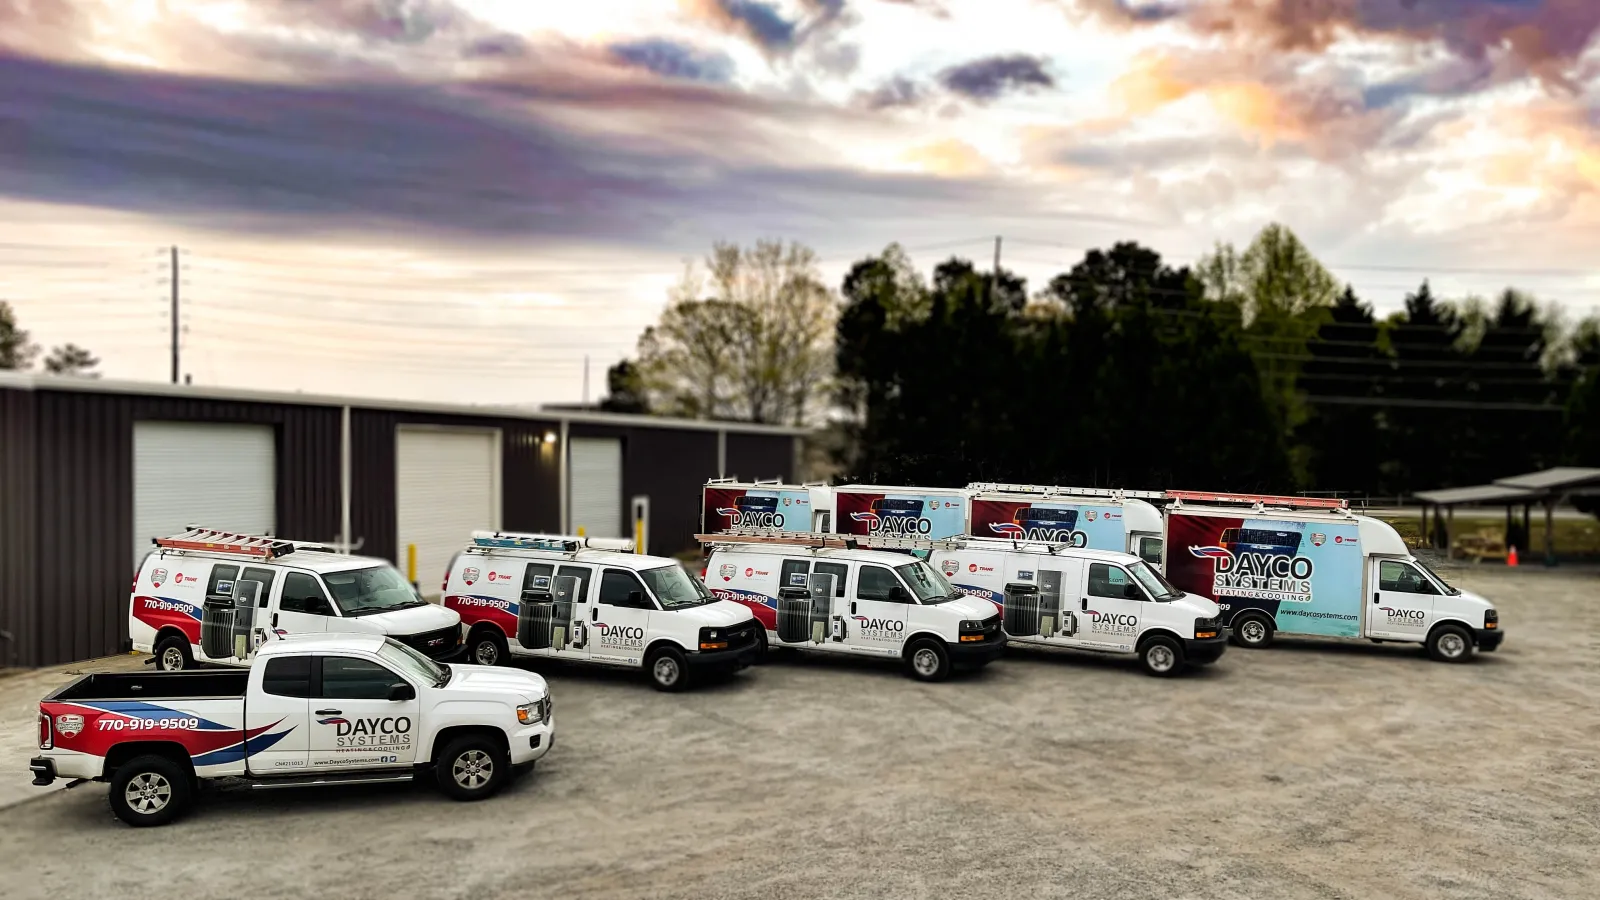 a group of white and red ambulances parked outside a building